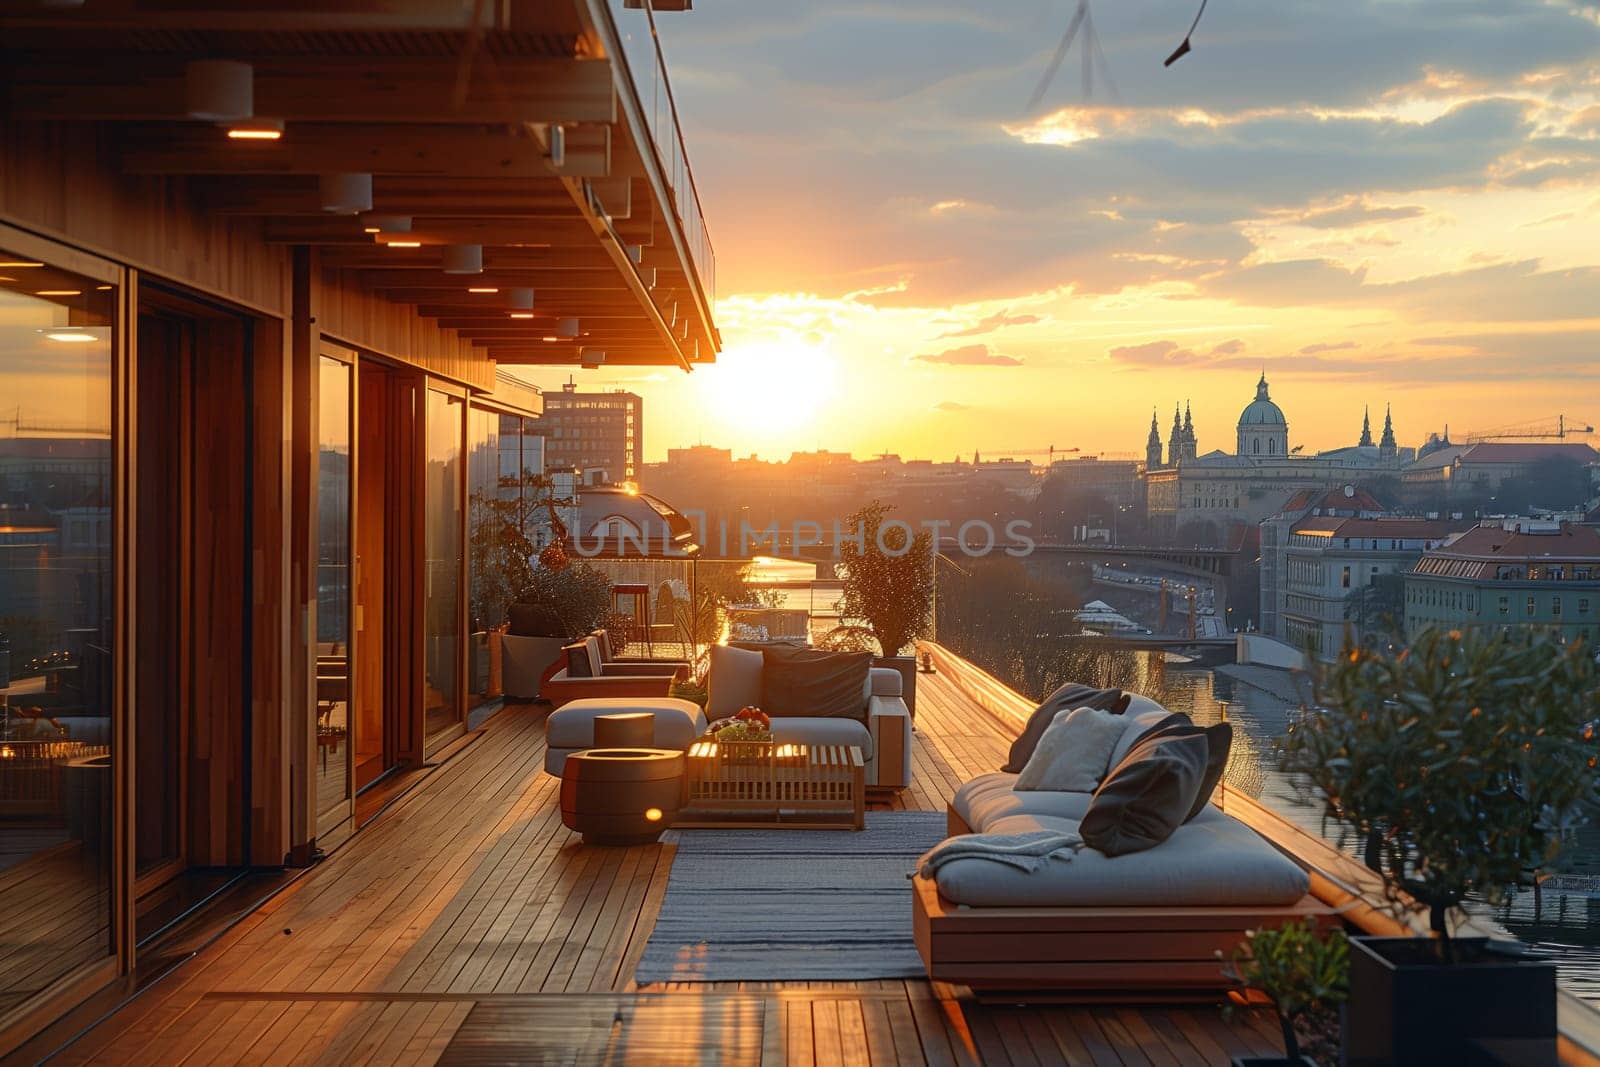 A building balcony overlooking a city at sunset, with a view of the skyline, clouds in the sky, vehicles on the streets, and houses in the landscape